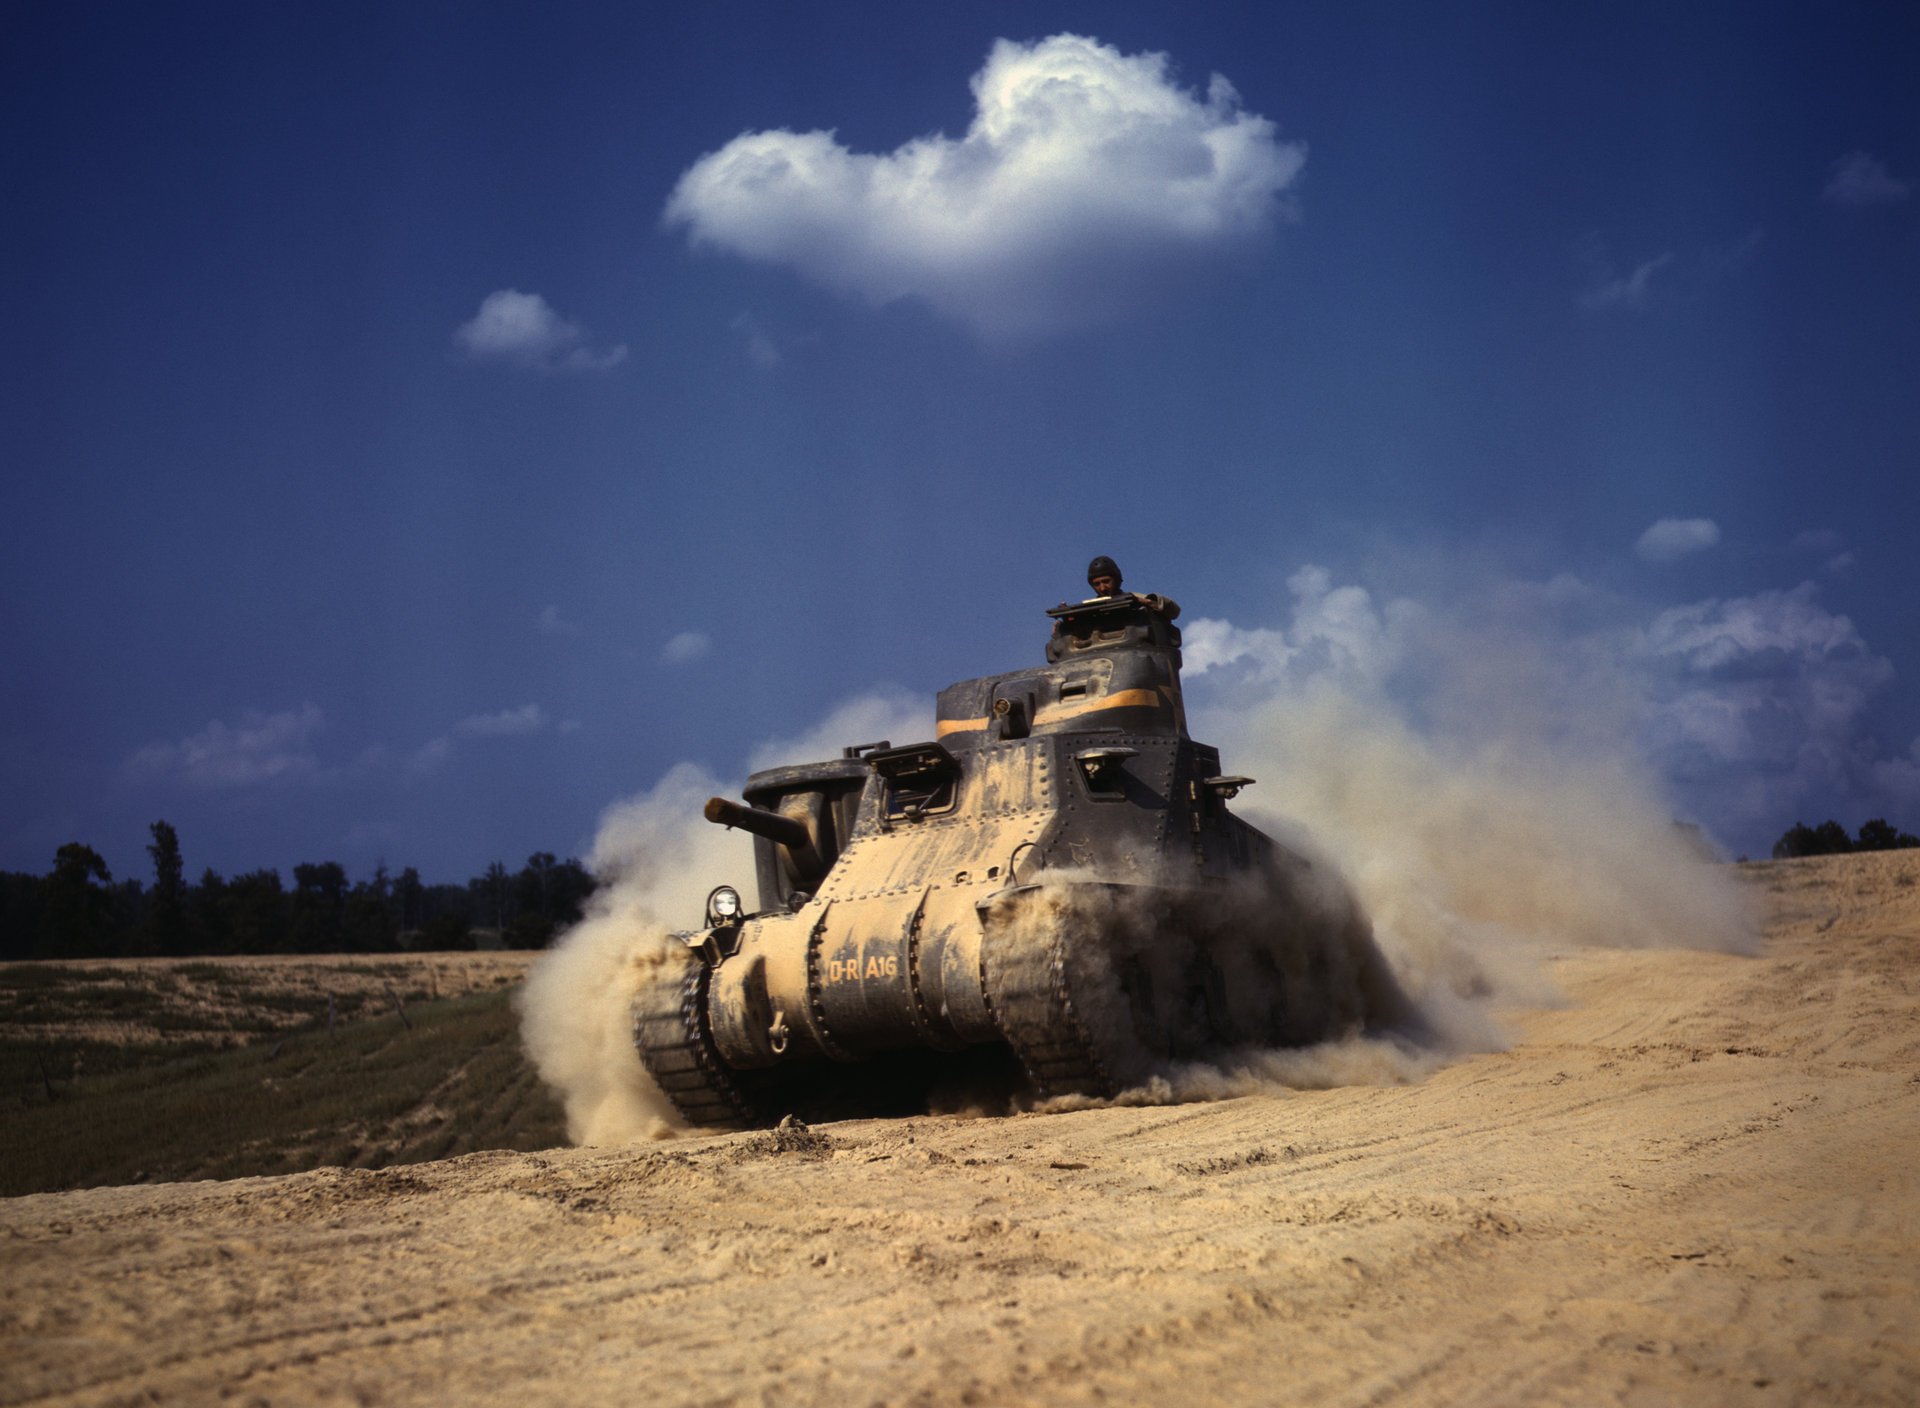 Military equipment in motion. tank in the dust